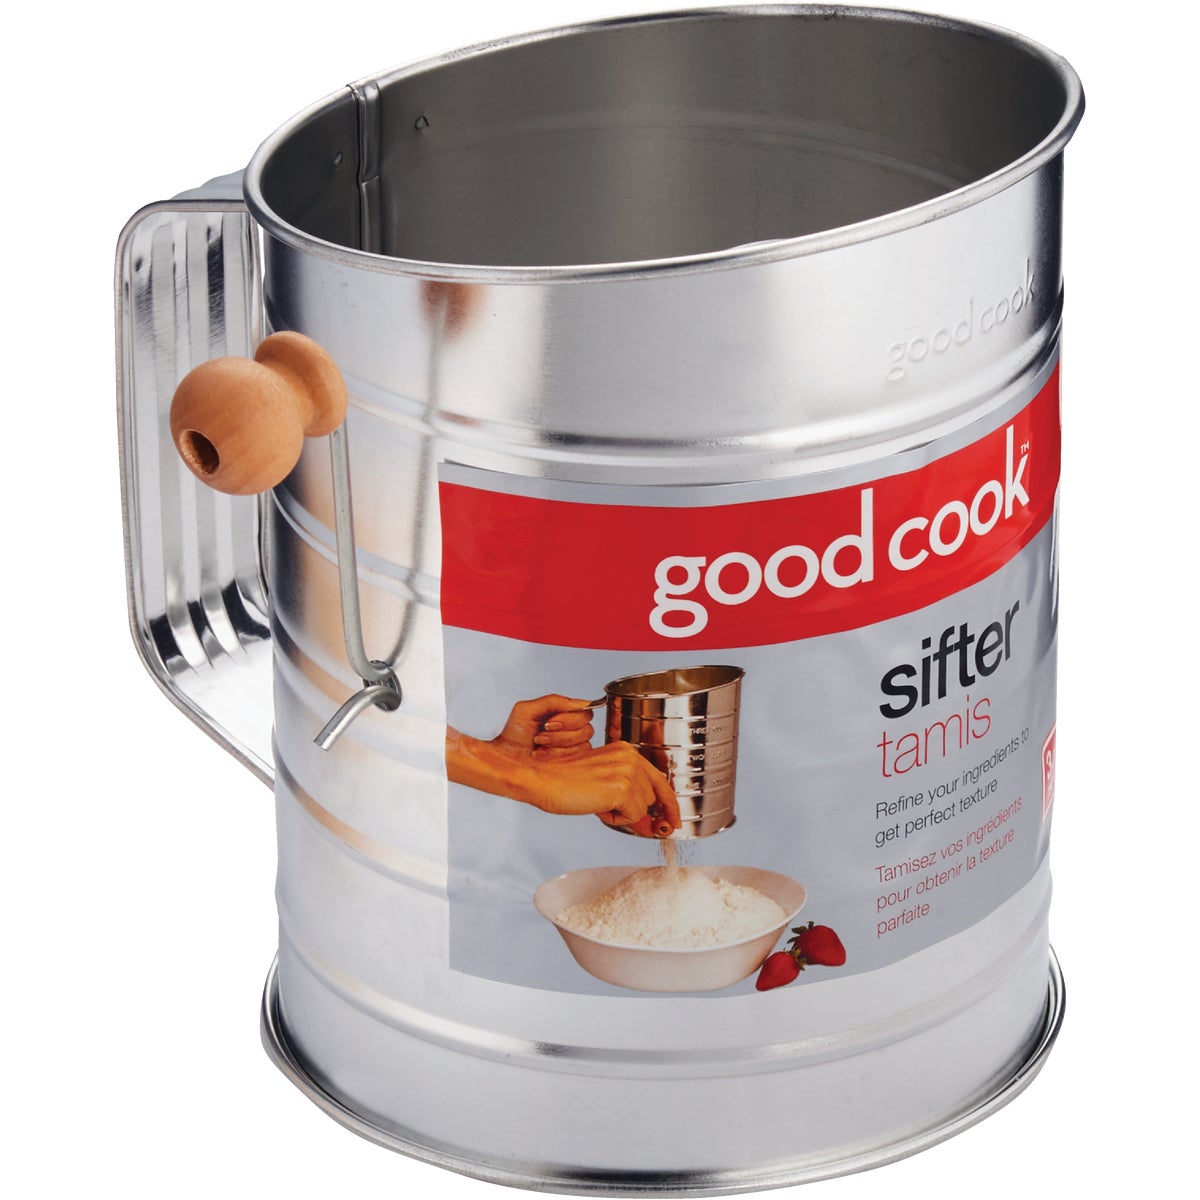 Goodcook 3-Cup Tin Sifter